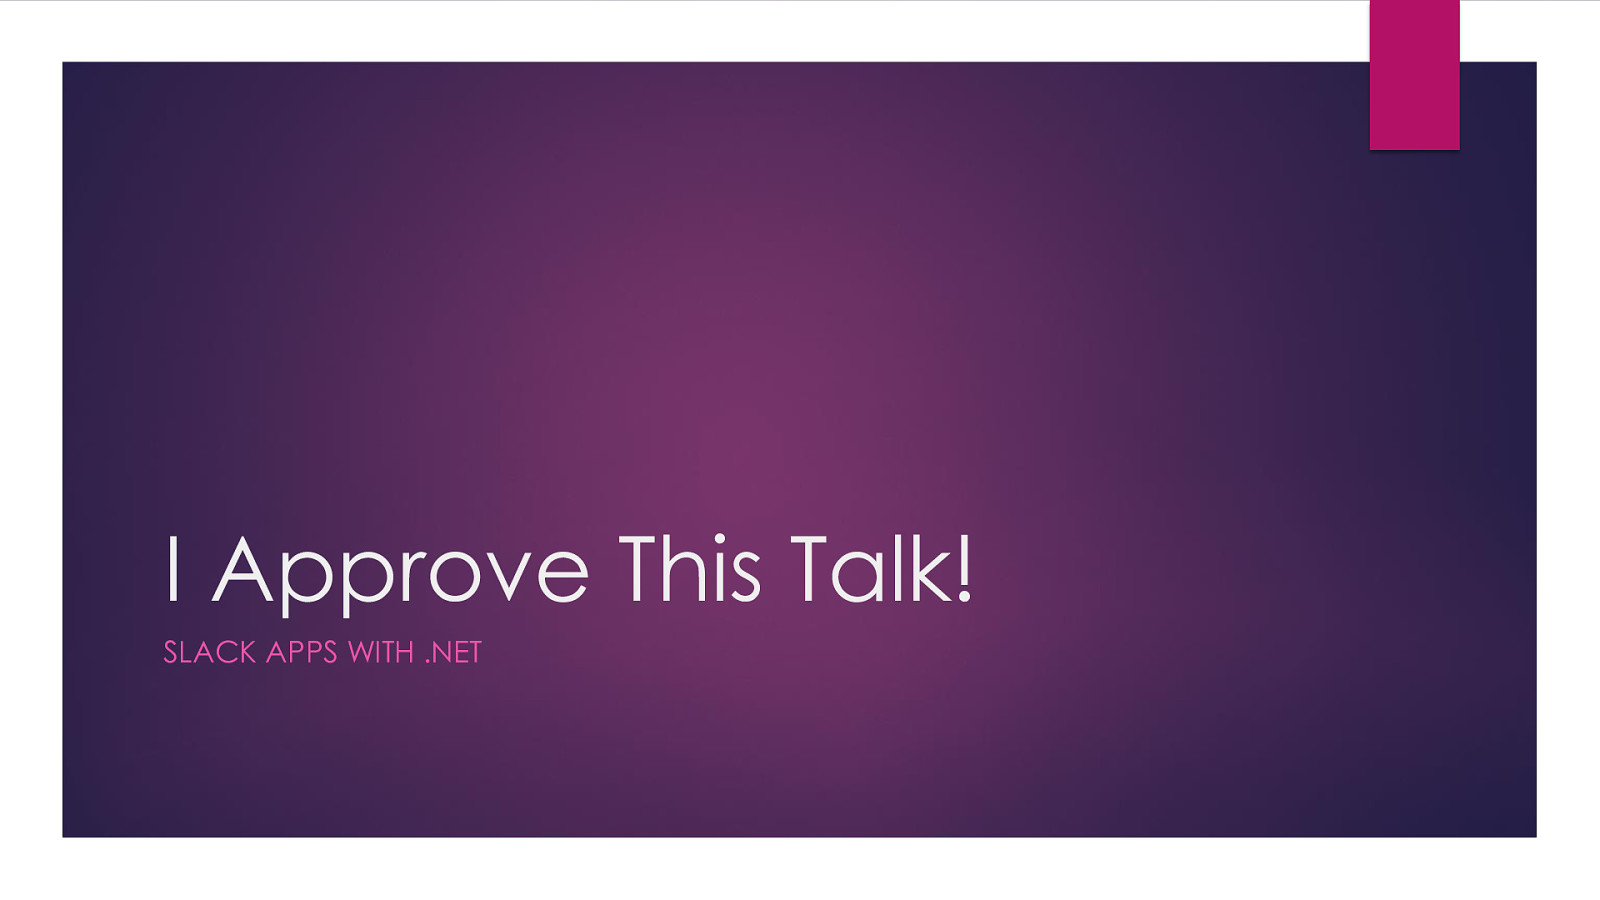 I Approve this talk! Slack apps and .NET